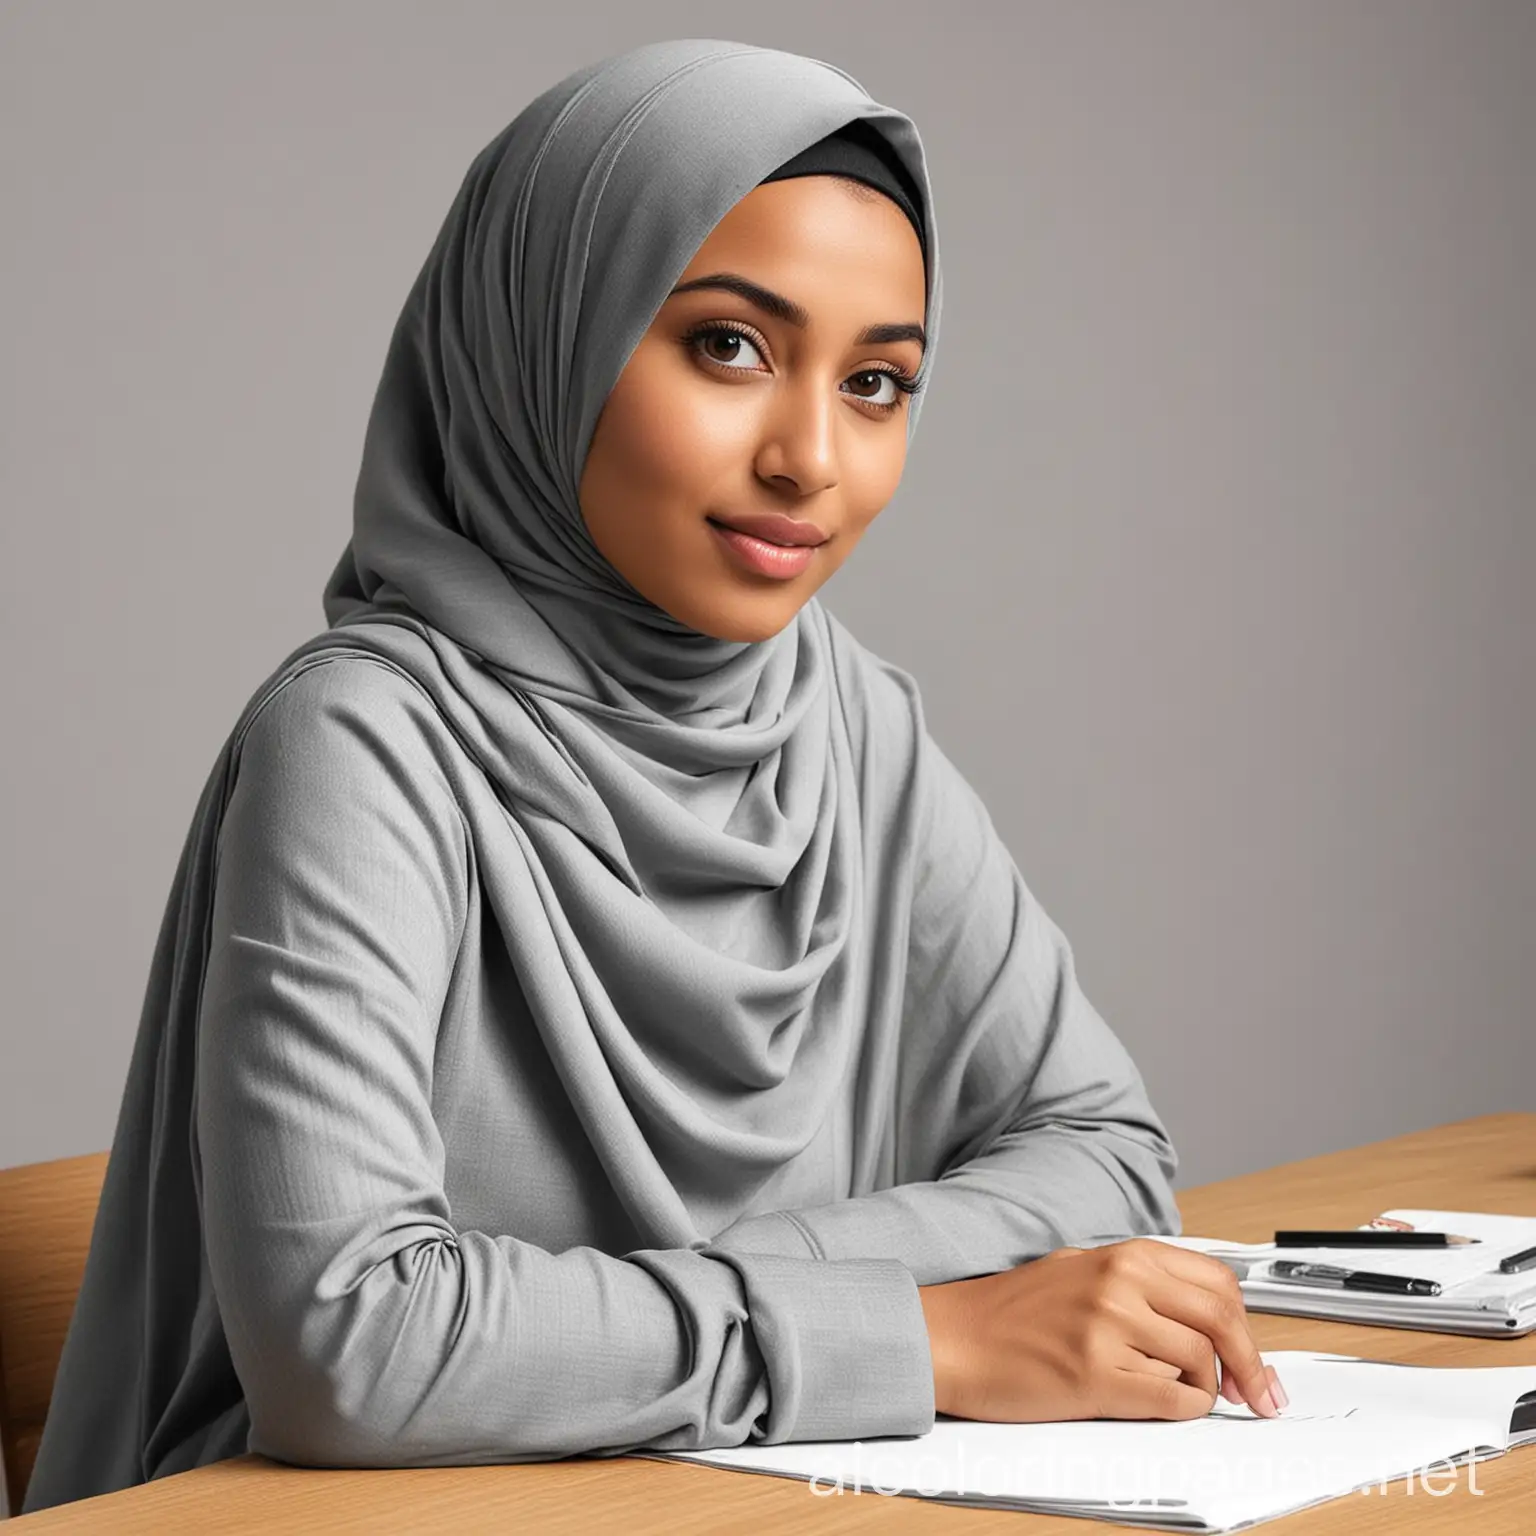 Generate an image of a young Muslim woman sitting at a desk in her studio. She has her hands on the desk and is wearing a hijab. Instead of posing for a picture, she is depicted as if she's presenting a podcast, so she should be sitting naturally, with a relaxed posture, her hands placed on the desk. She is looking straight at the camera in a front view., Coloring Page, black and white, line art, white background, Simplicity, Ample White Space.